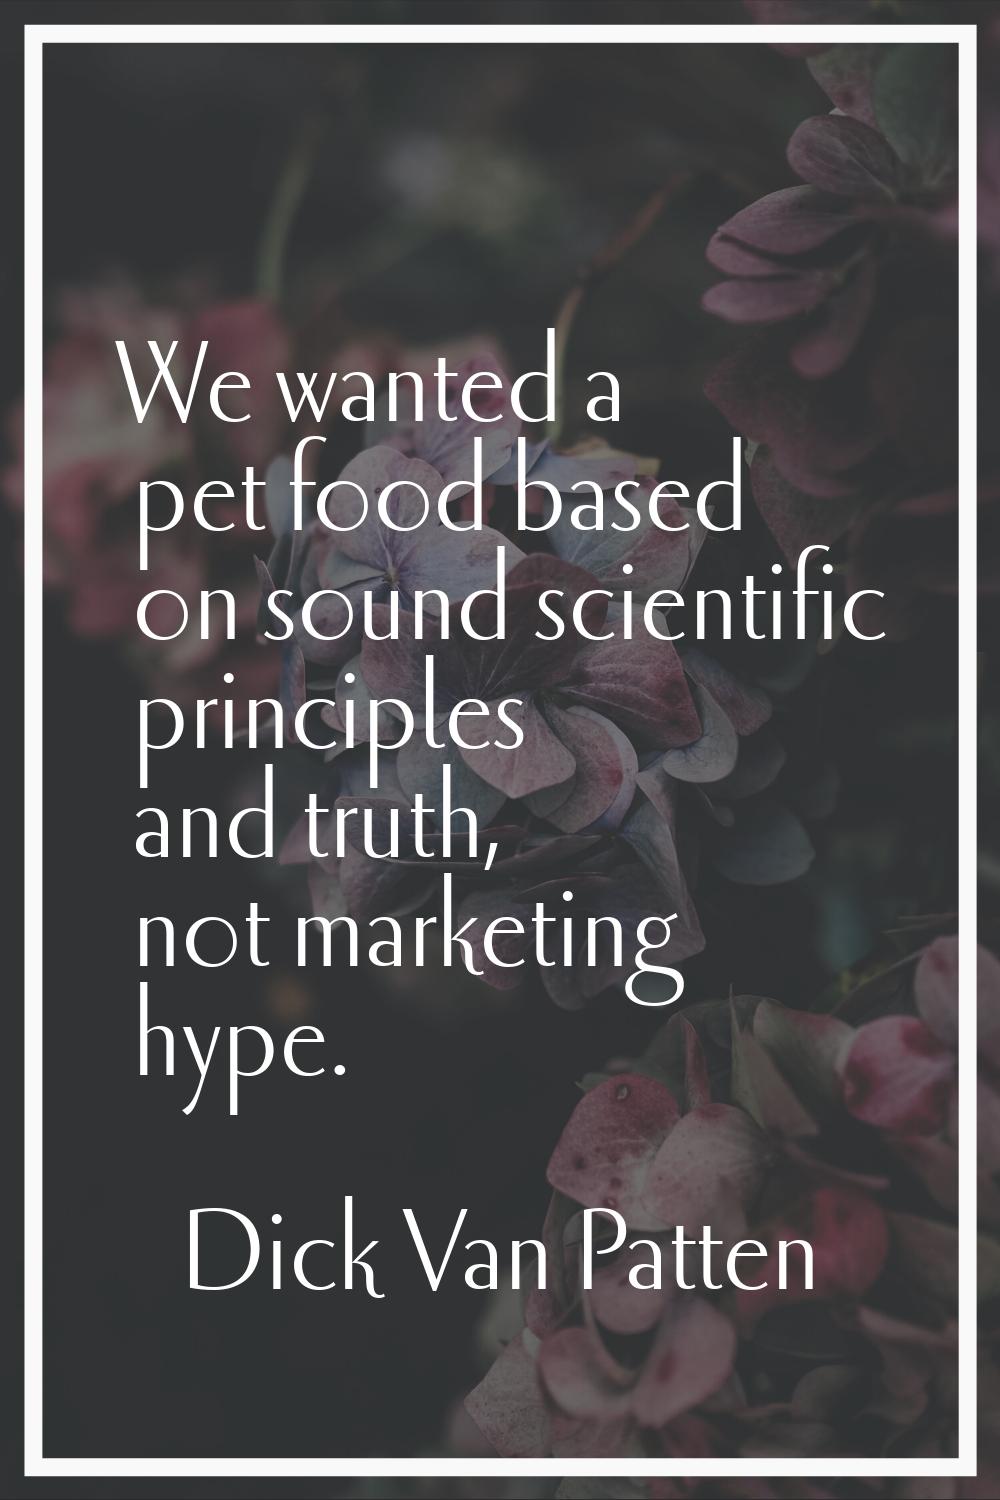 We wanted a pet food based on sound scientific principles and truth, not marketing hype.